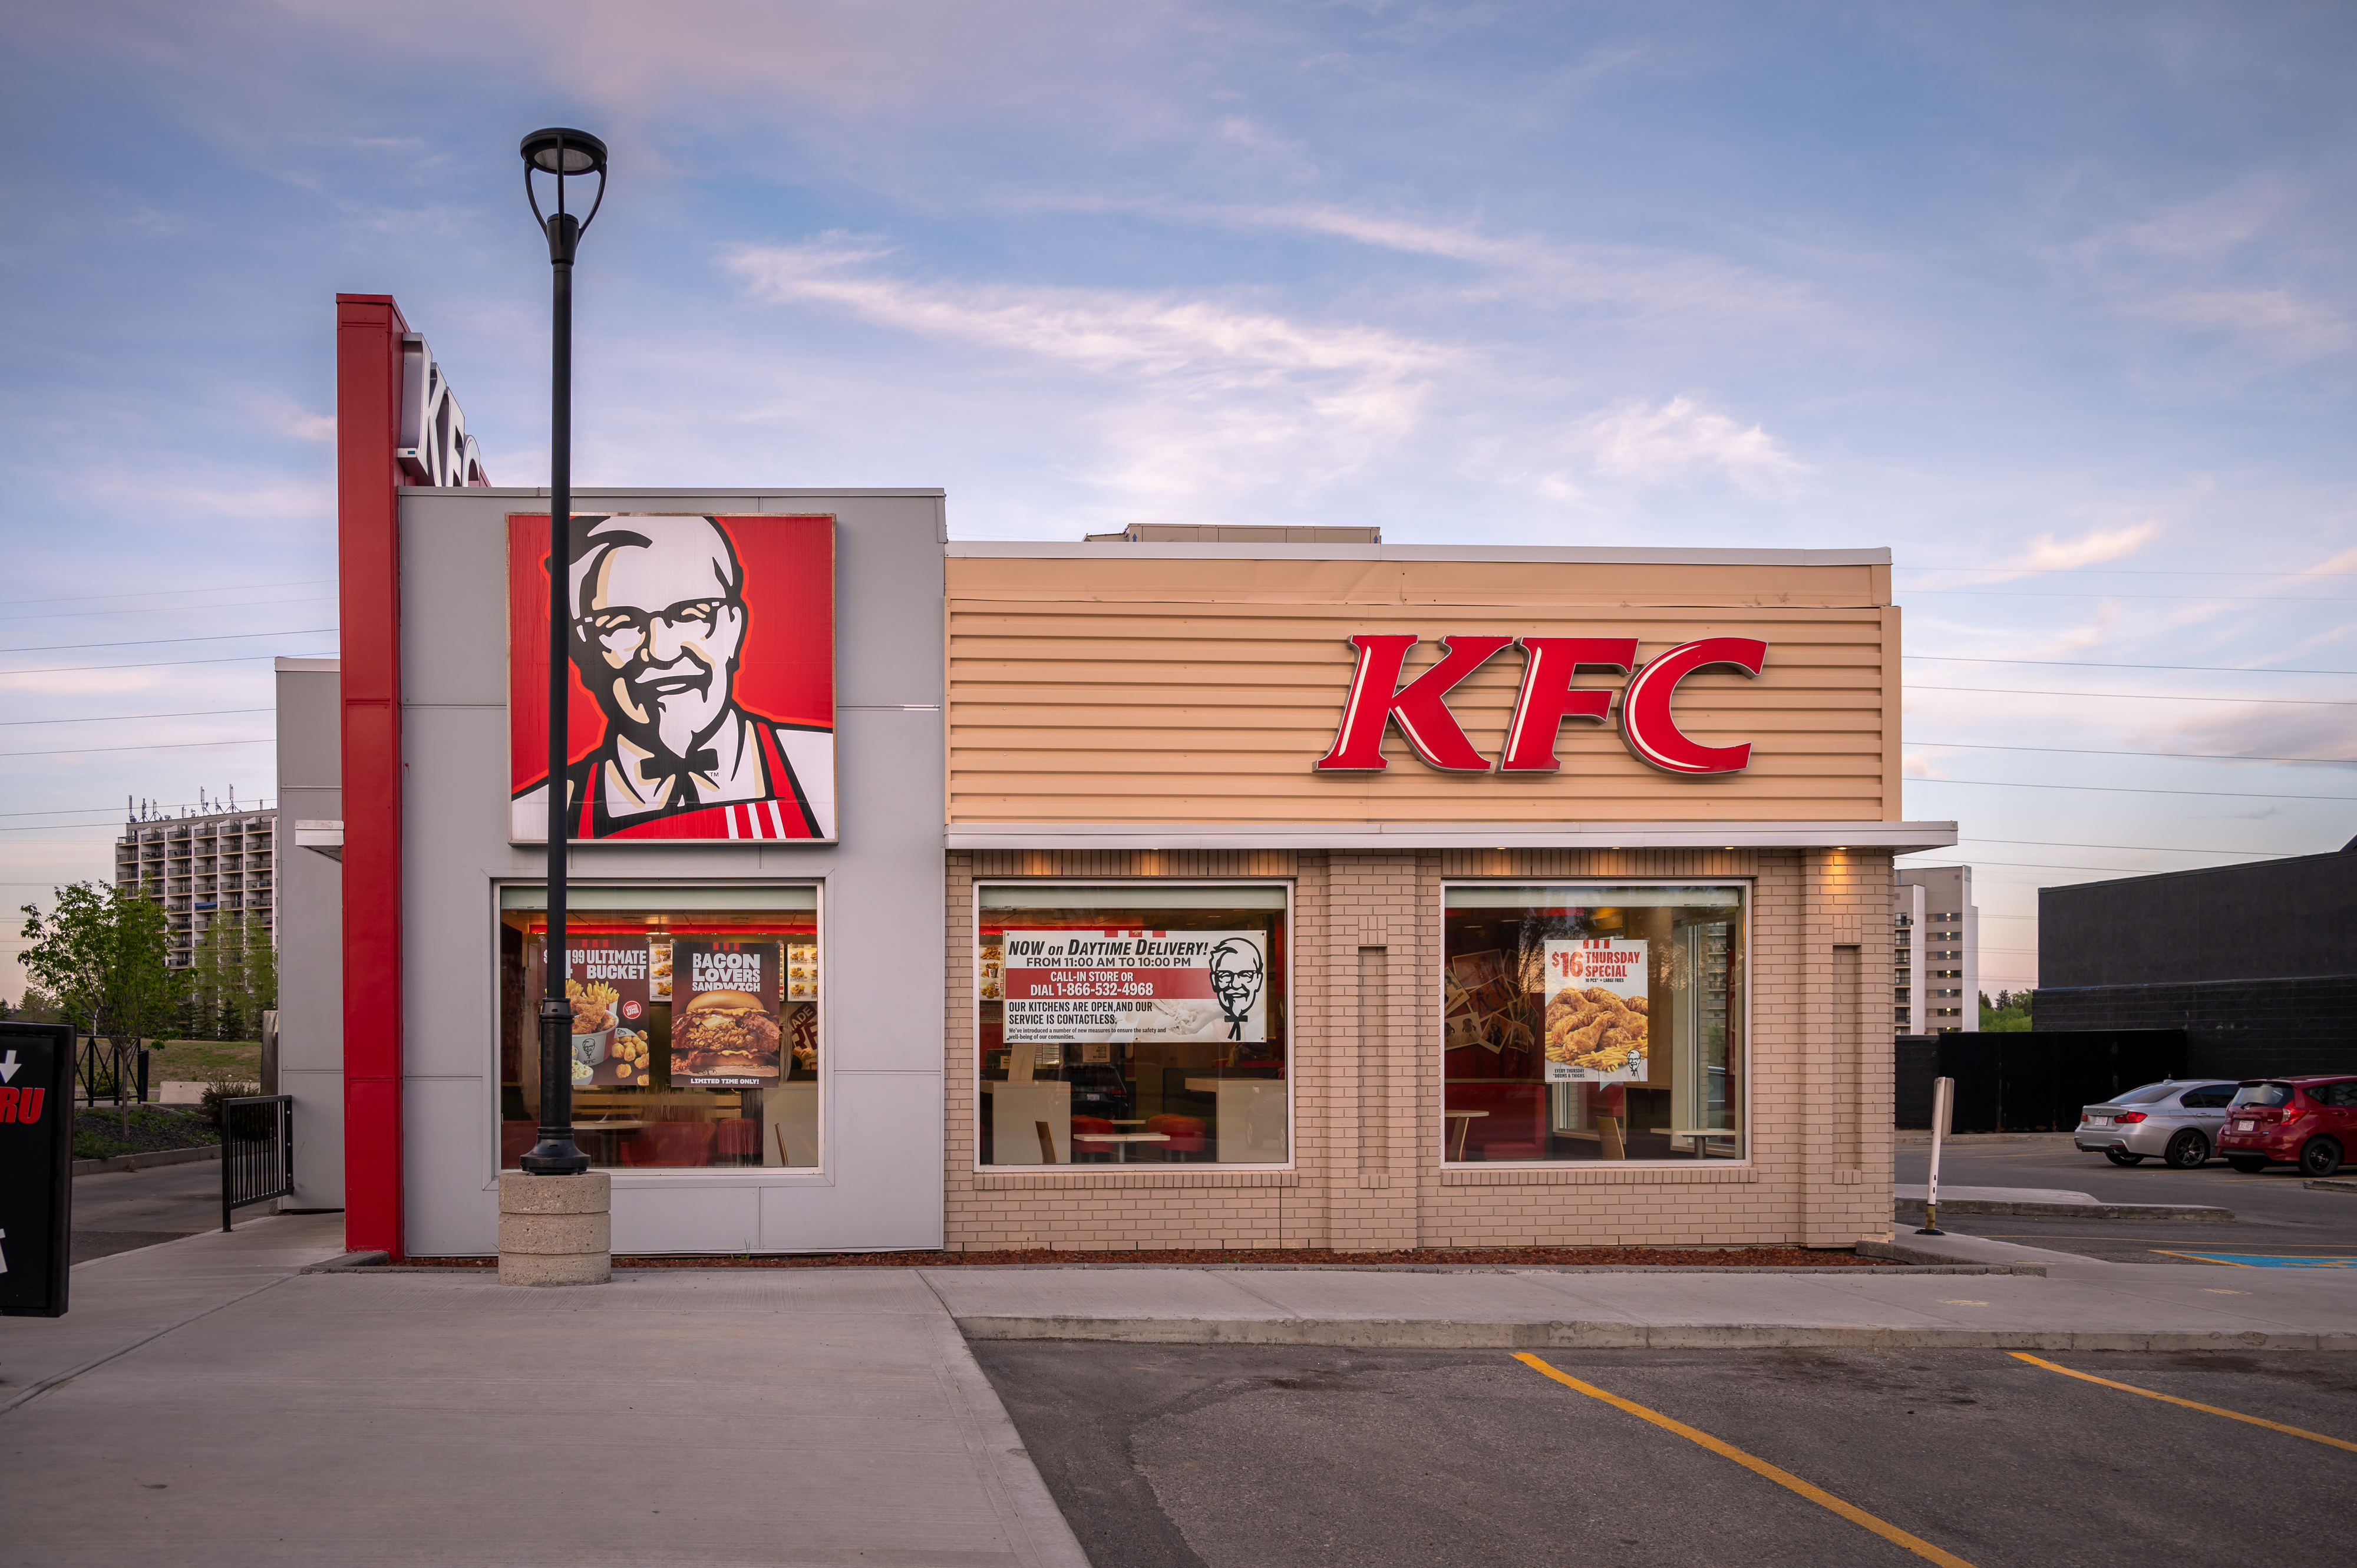 Resized image of a KFC restaurant exterior with Colonel Sanders logo and KFC signage visible